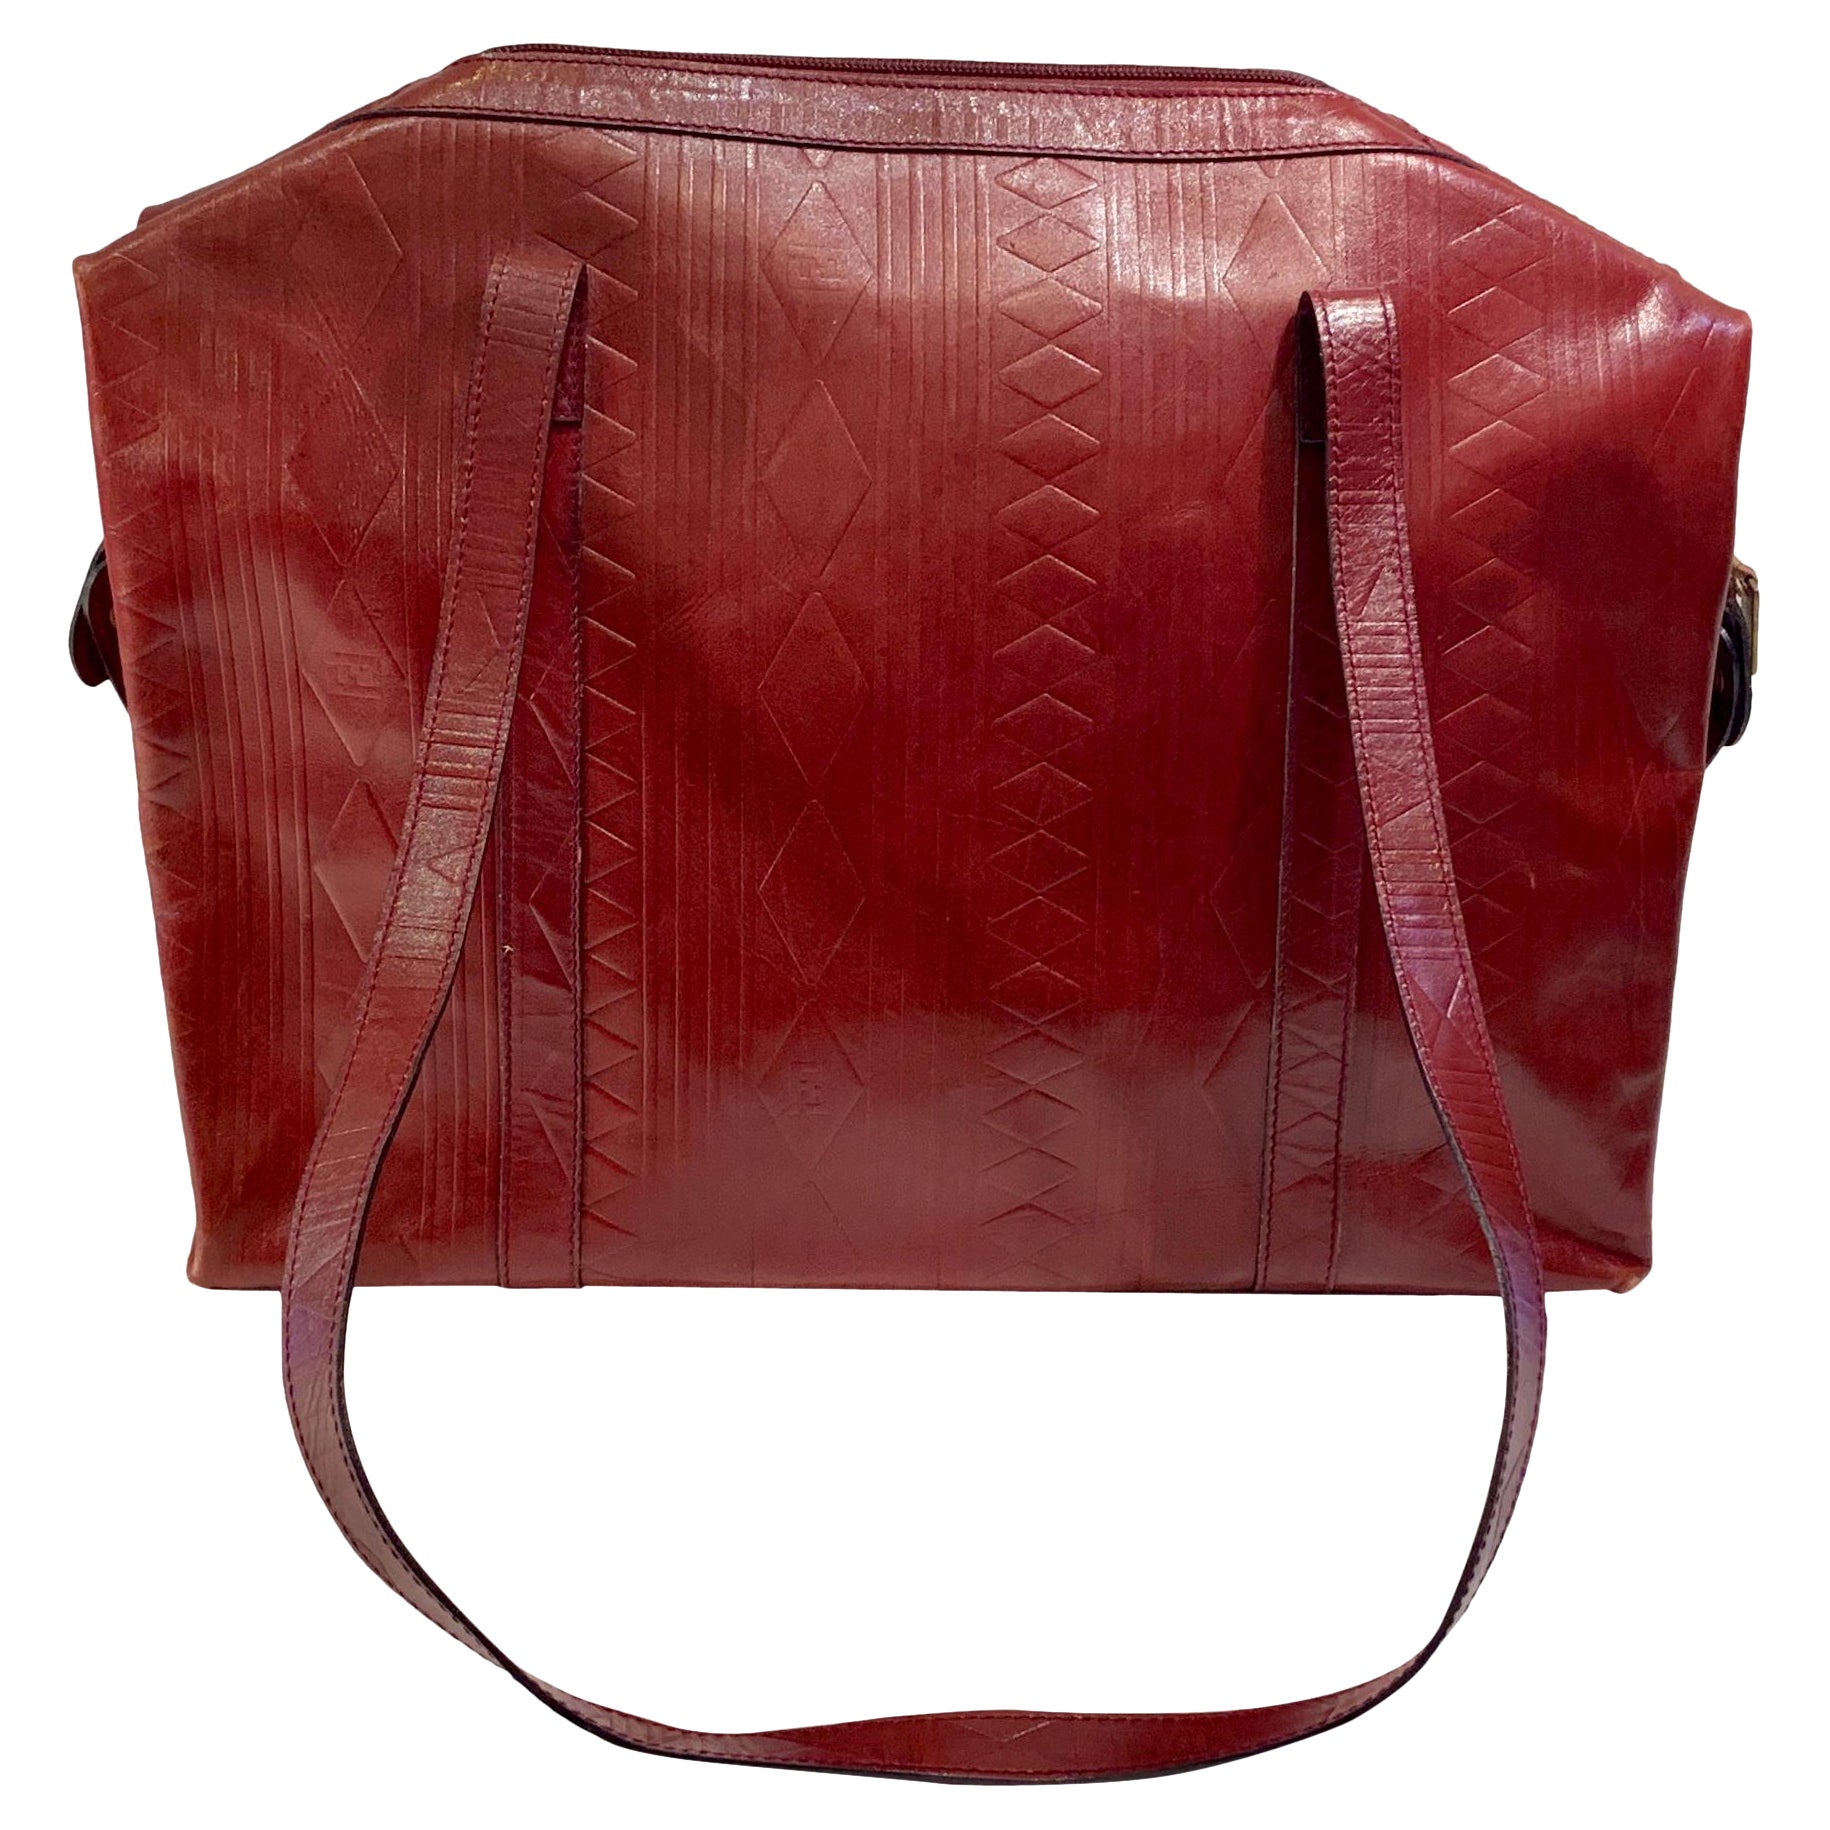 Very Large 1980s FENDI S.A.S. Diamond Embossed Burgundy Leather Purse For Sale